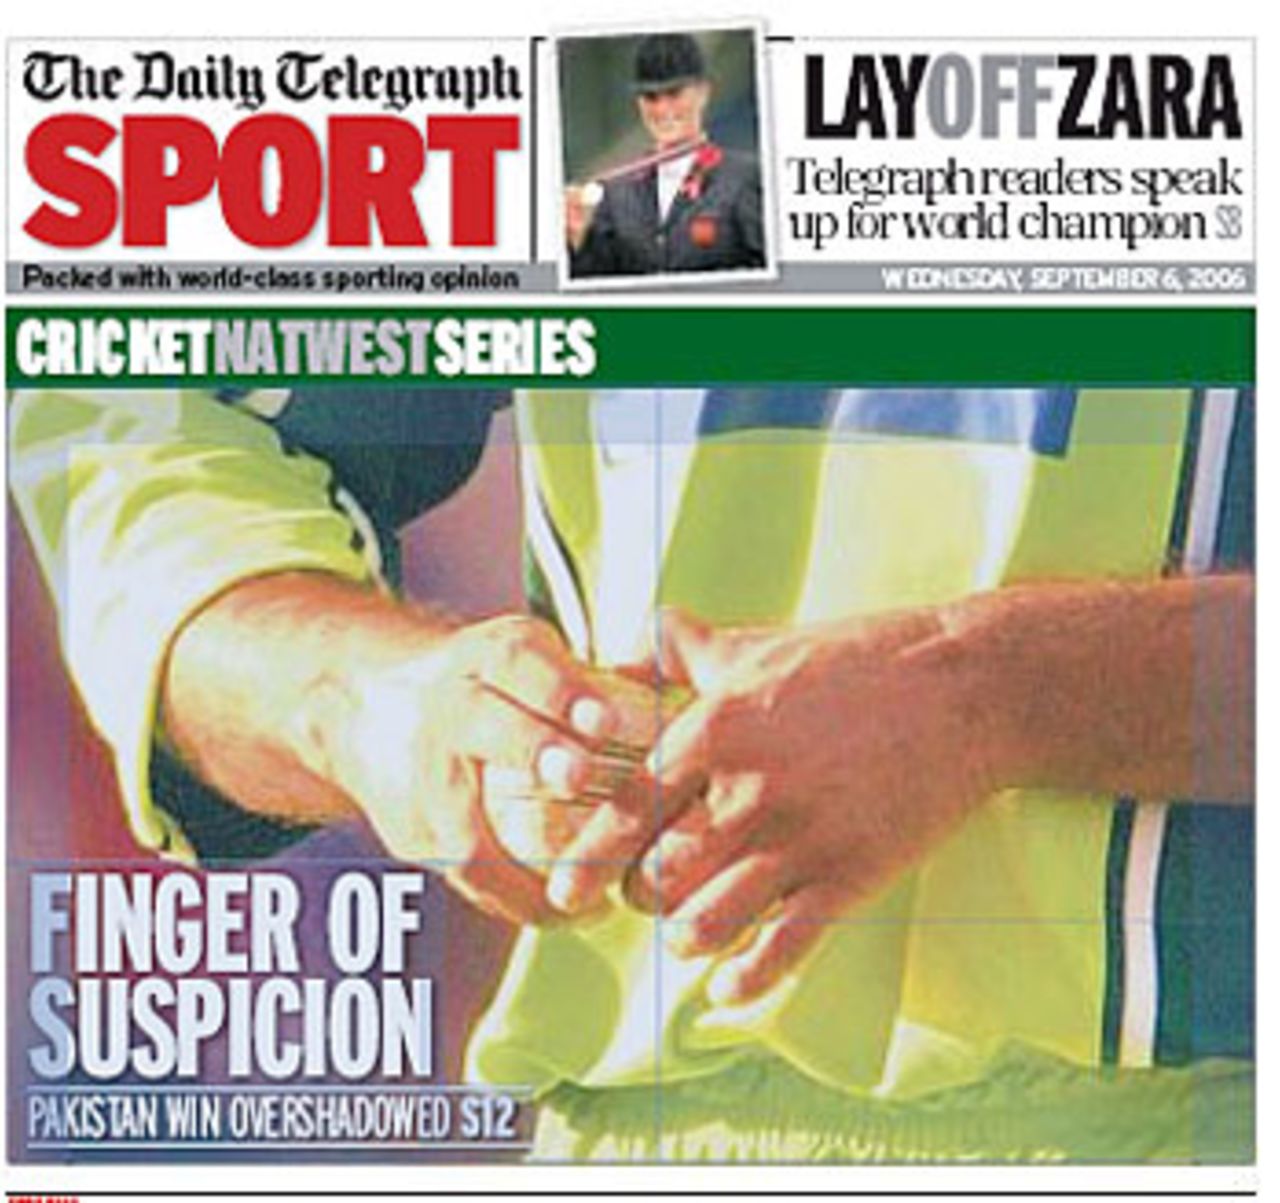 The lead story in the sports section of <I>The Daily Telegraph</I>